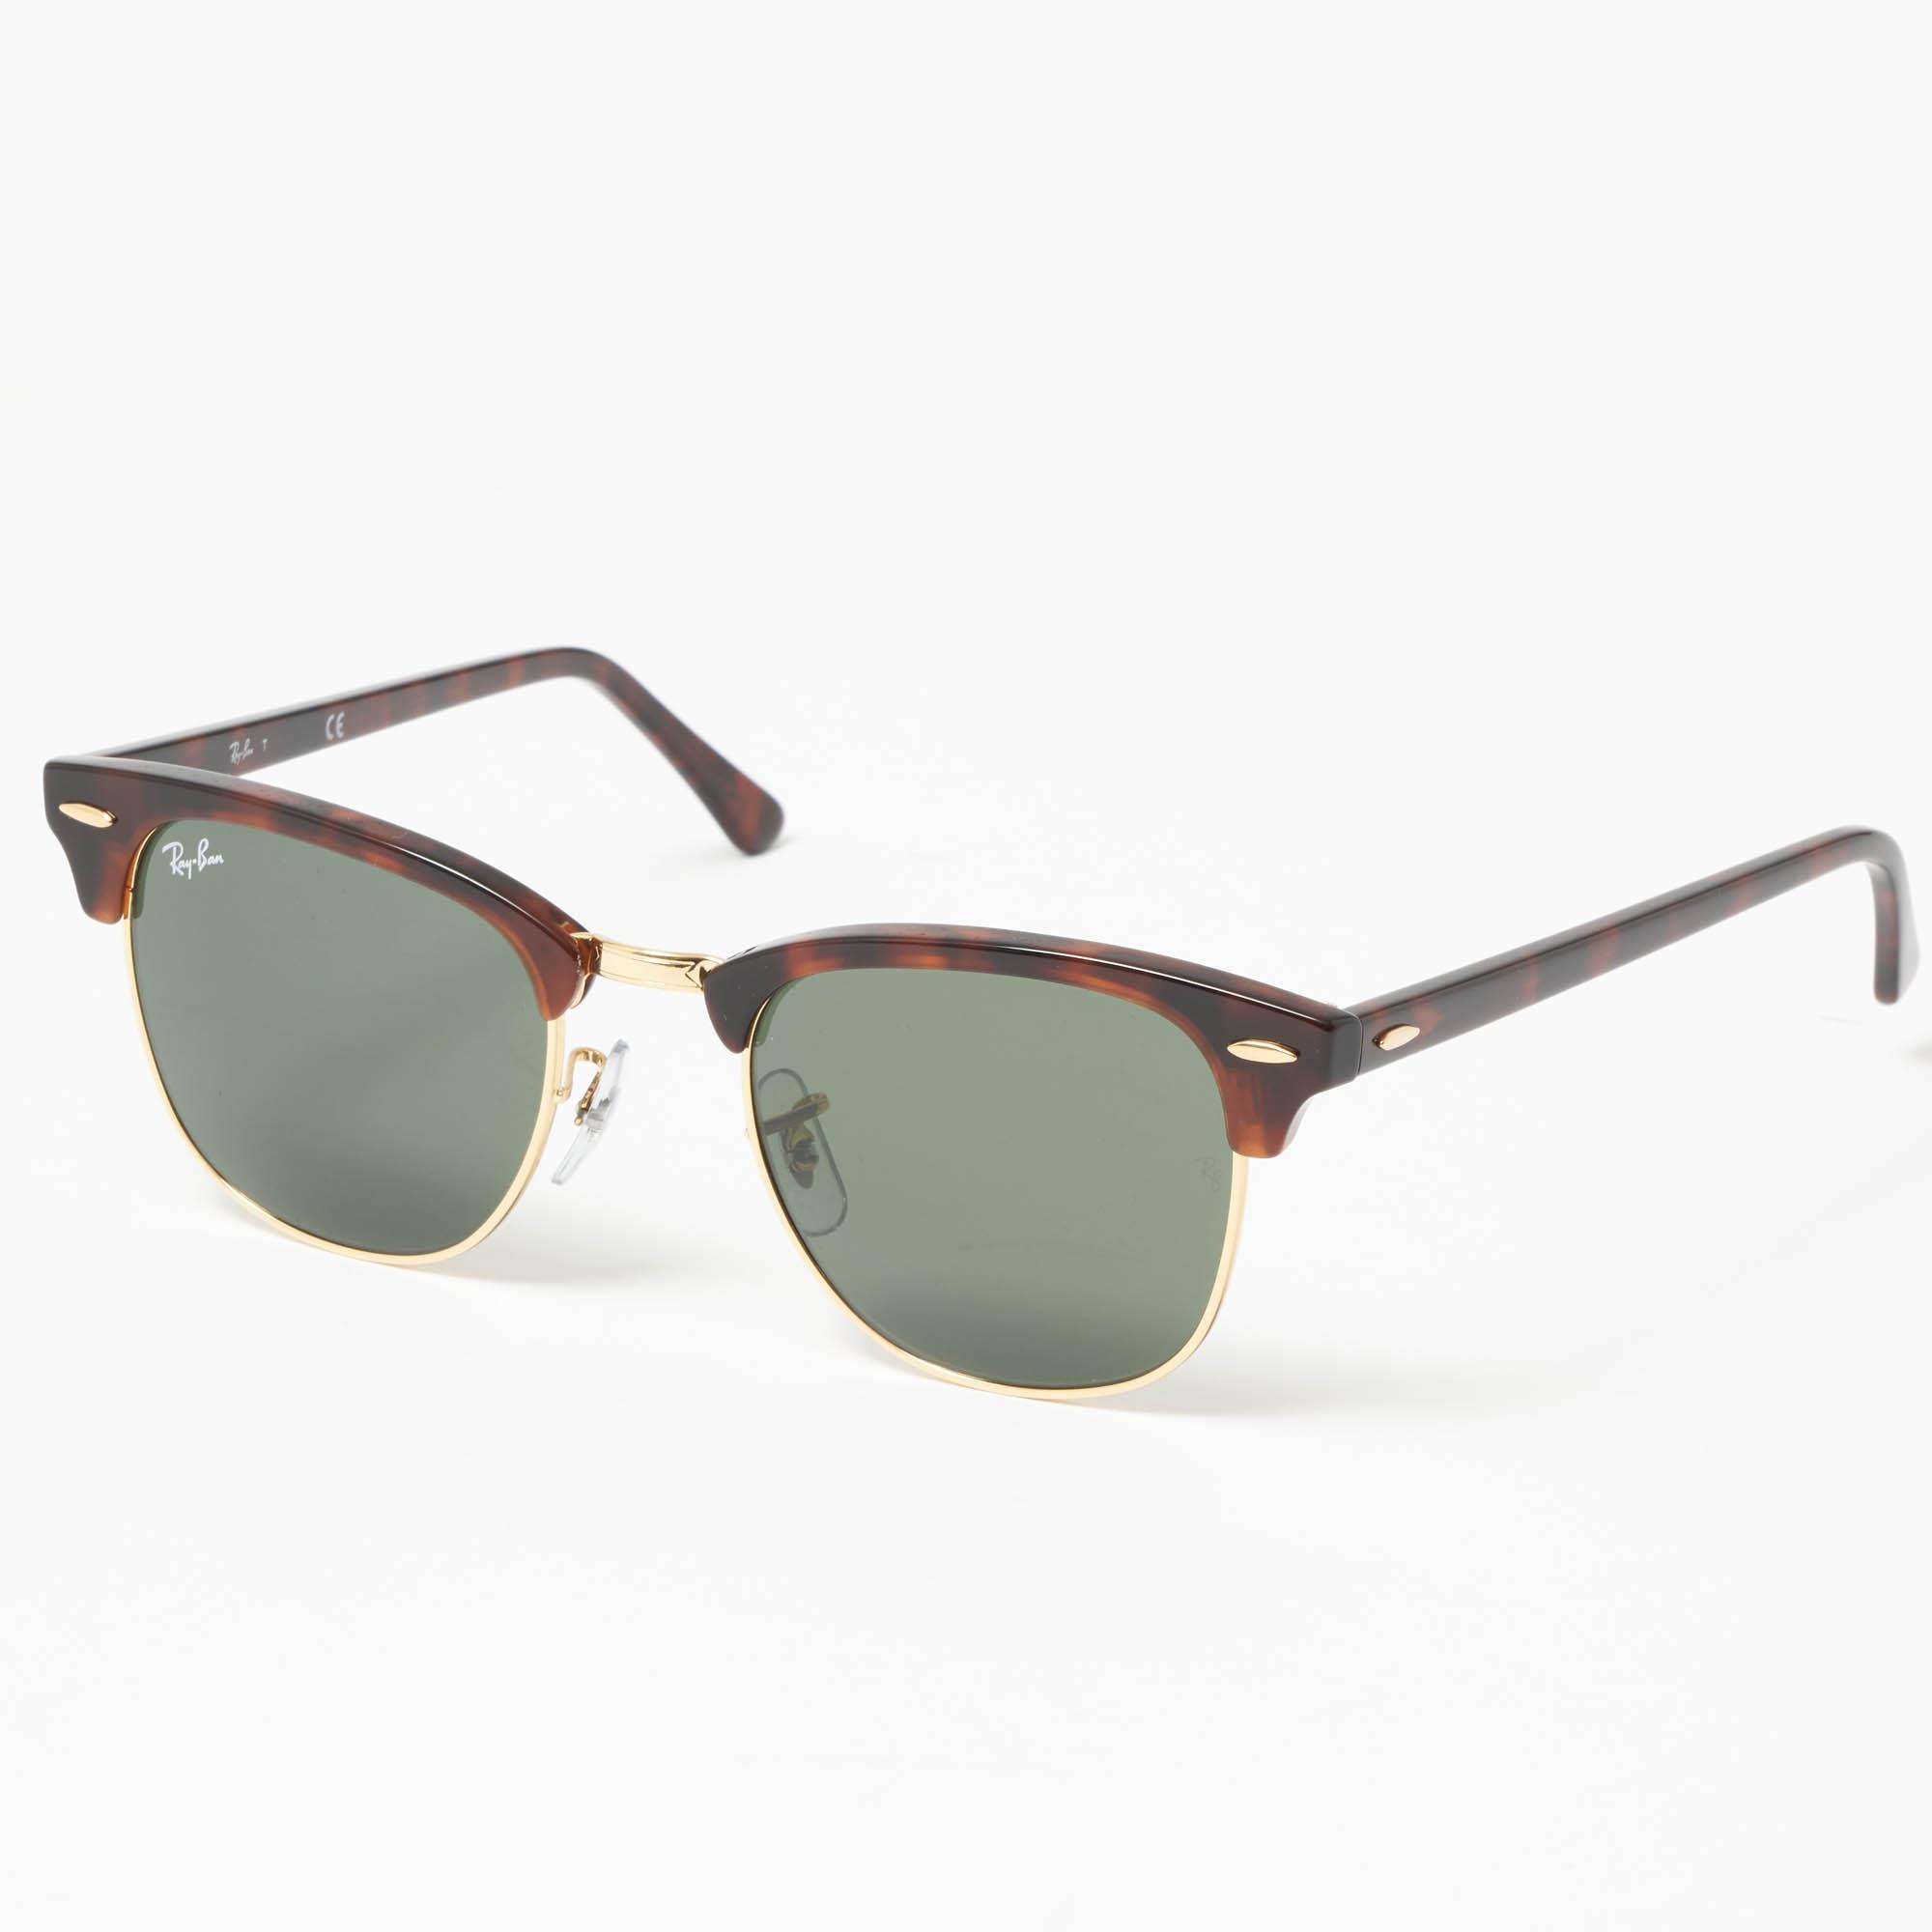 Lyst Ray Ban Ray Ban Clubmaster Classic Tortoise Sunglasses Rb3016